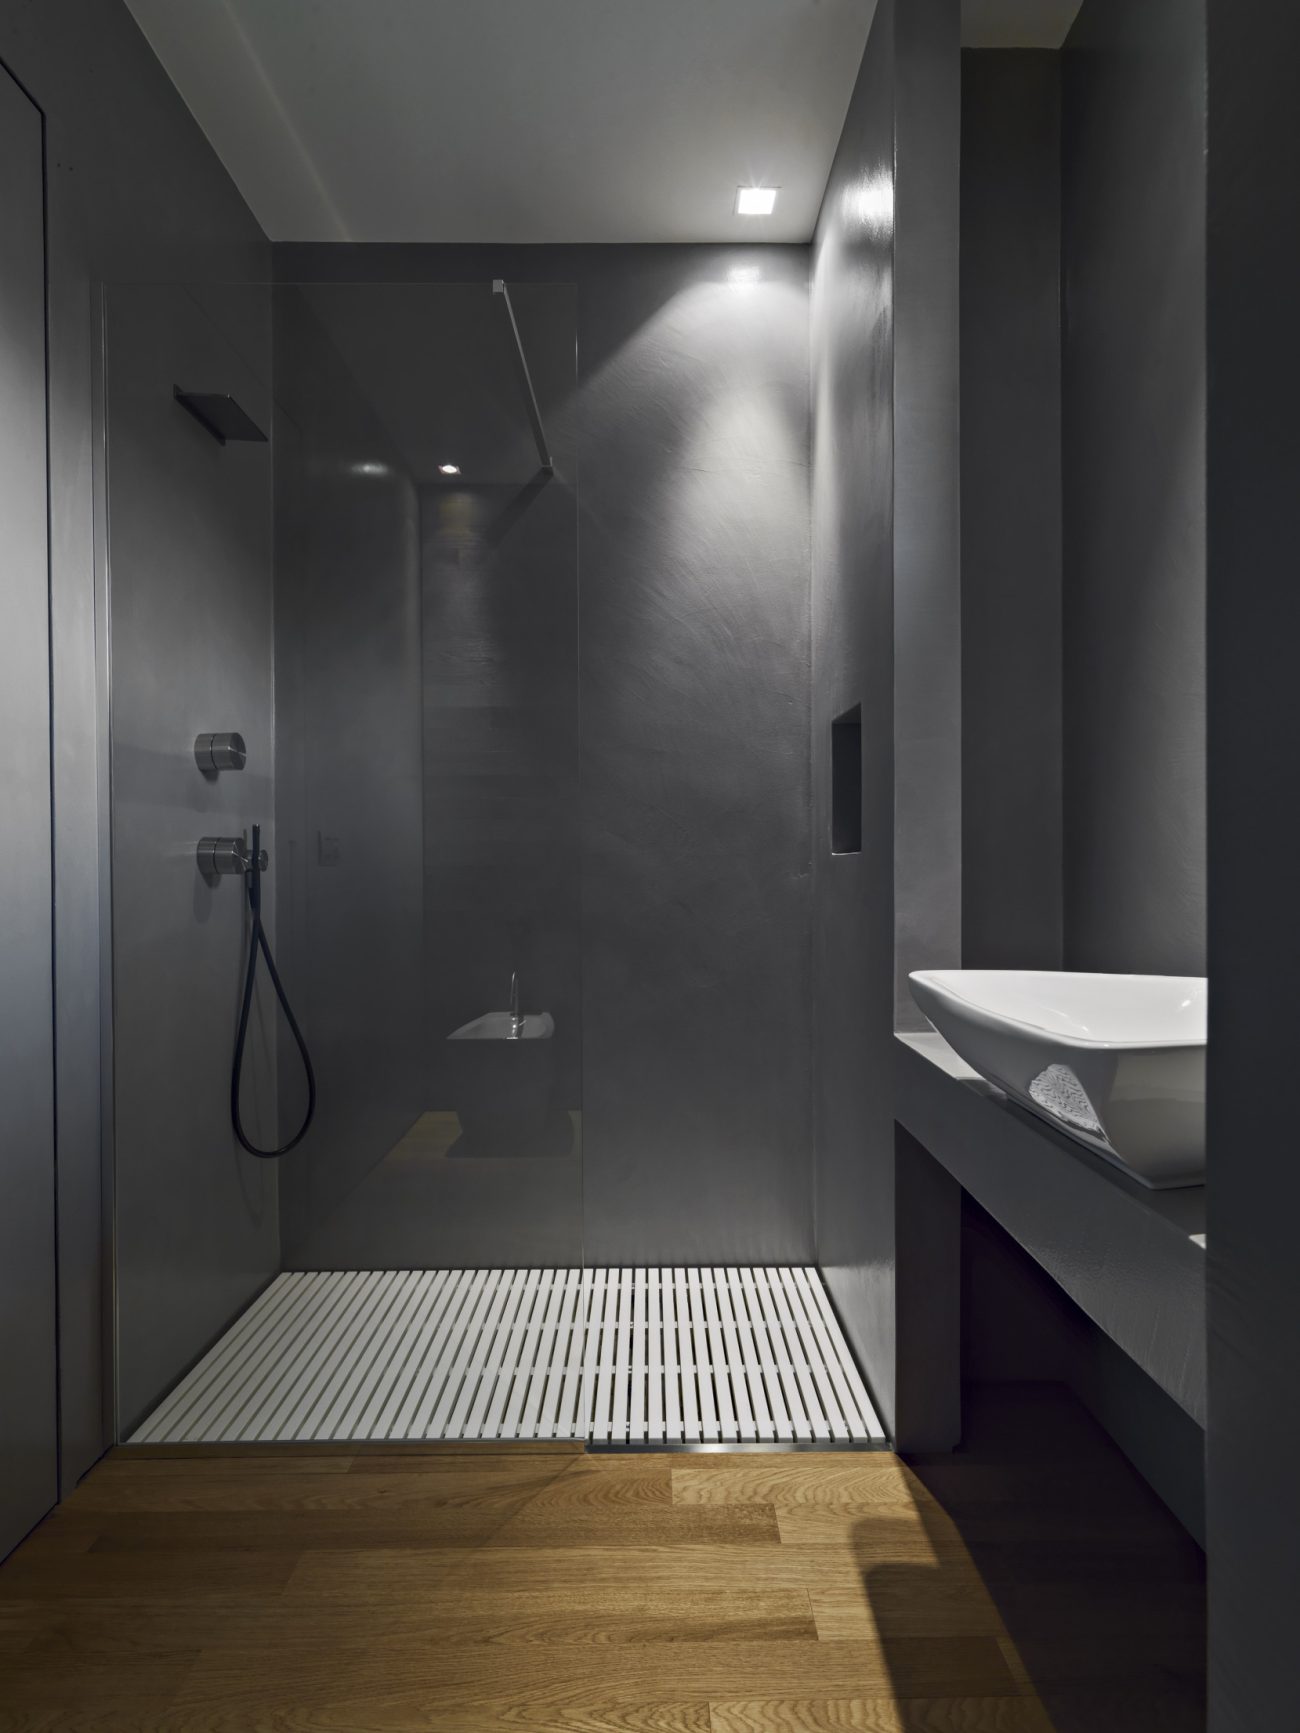 Interior of a contemporary bathroom with grey resin walls and subdued lights